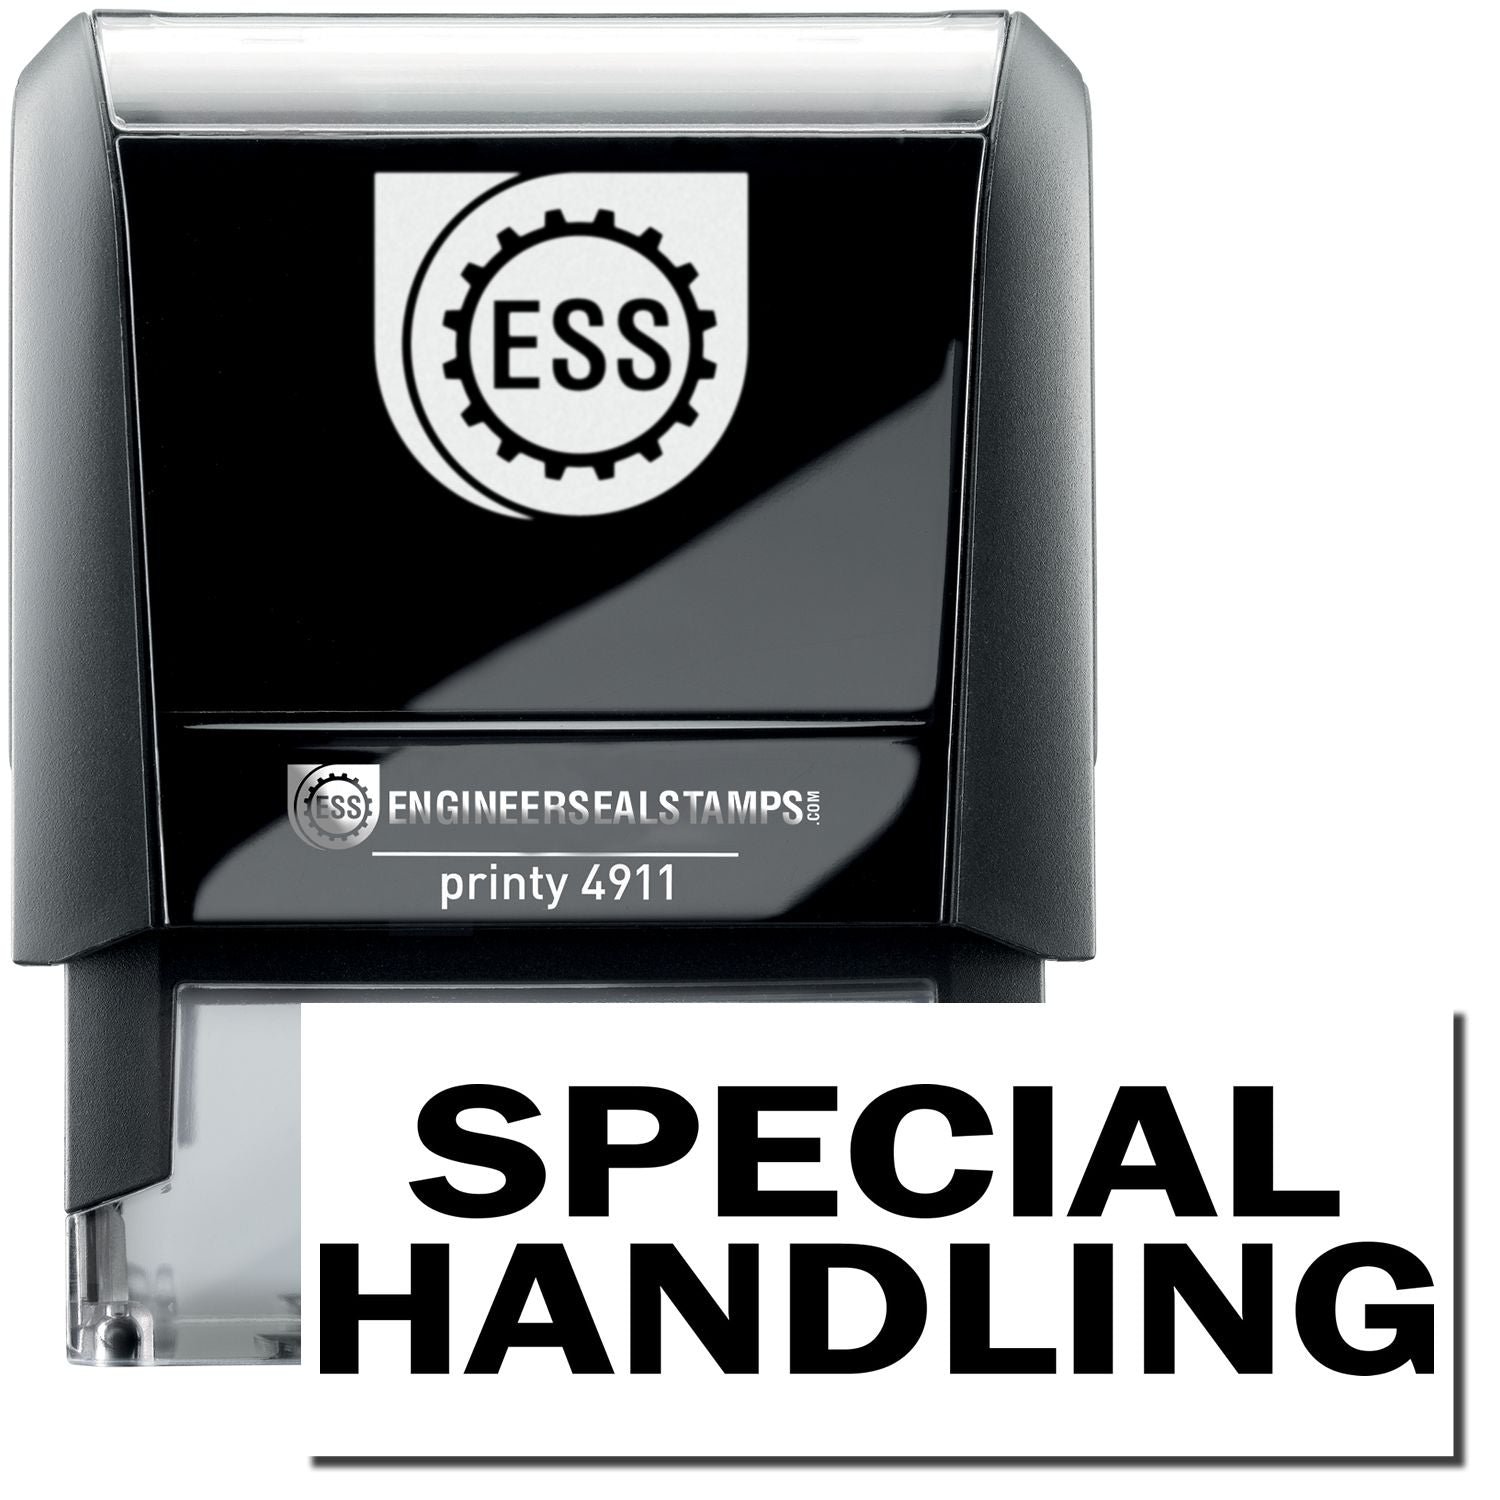 A self-inking stamp with a stamped image showing how the text "SPECIAL HANDLING" is displayed after stamping.